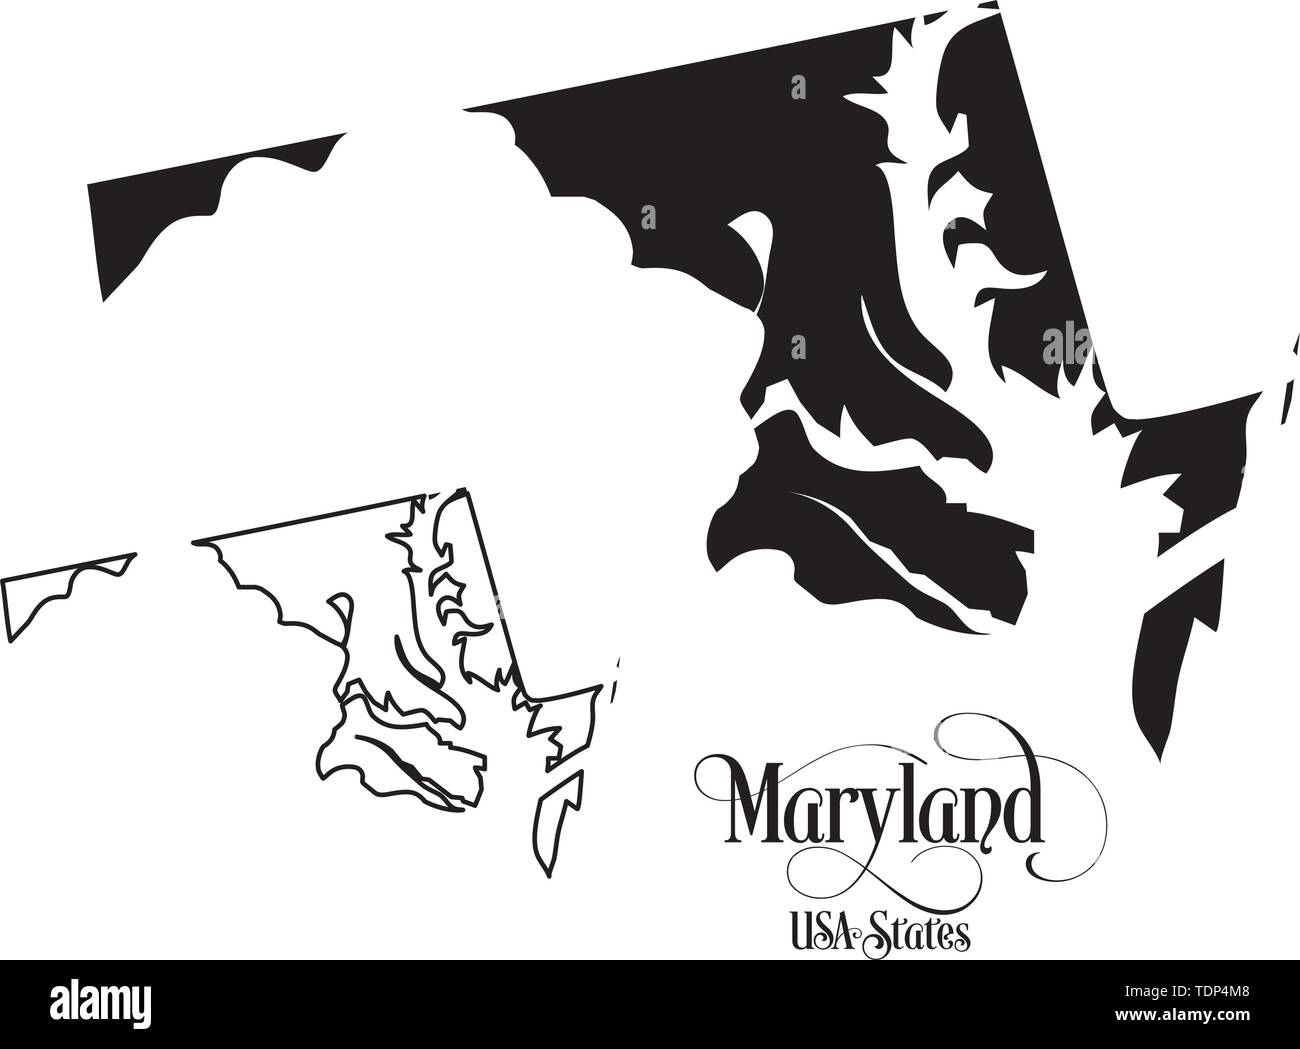 Map of The United States of America (USA) State of Maryland - Illustration on White Background. Stock Vector